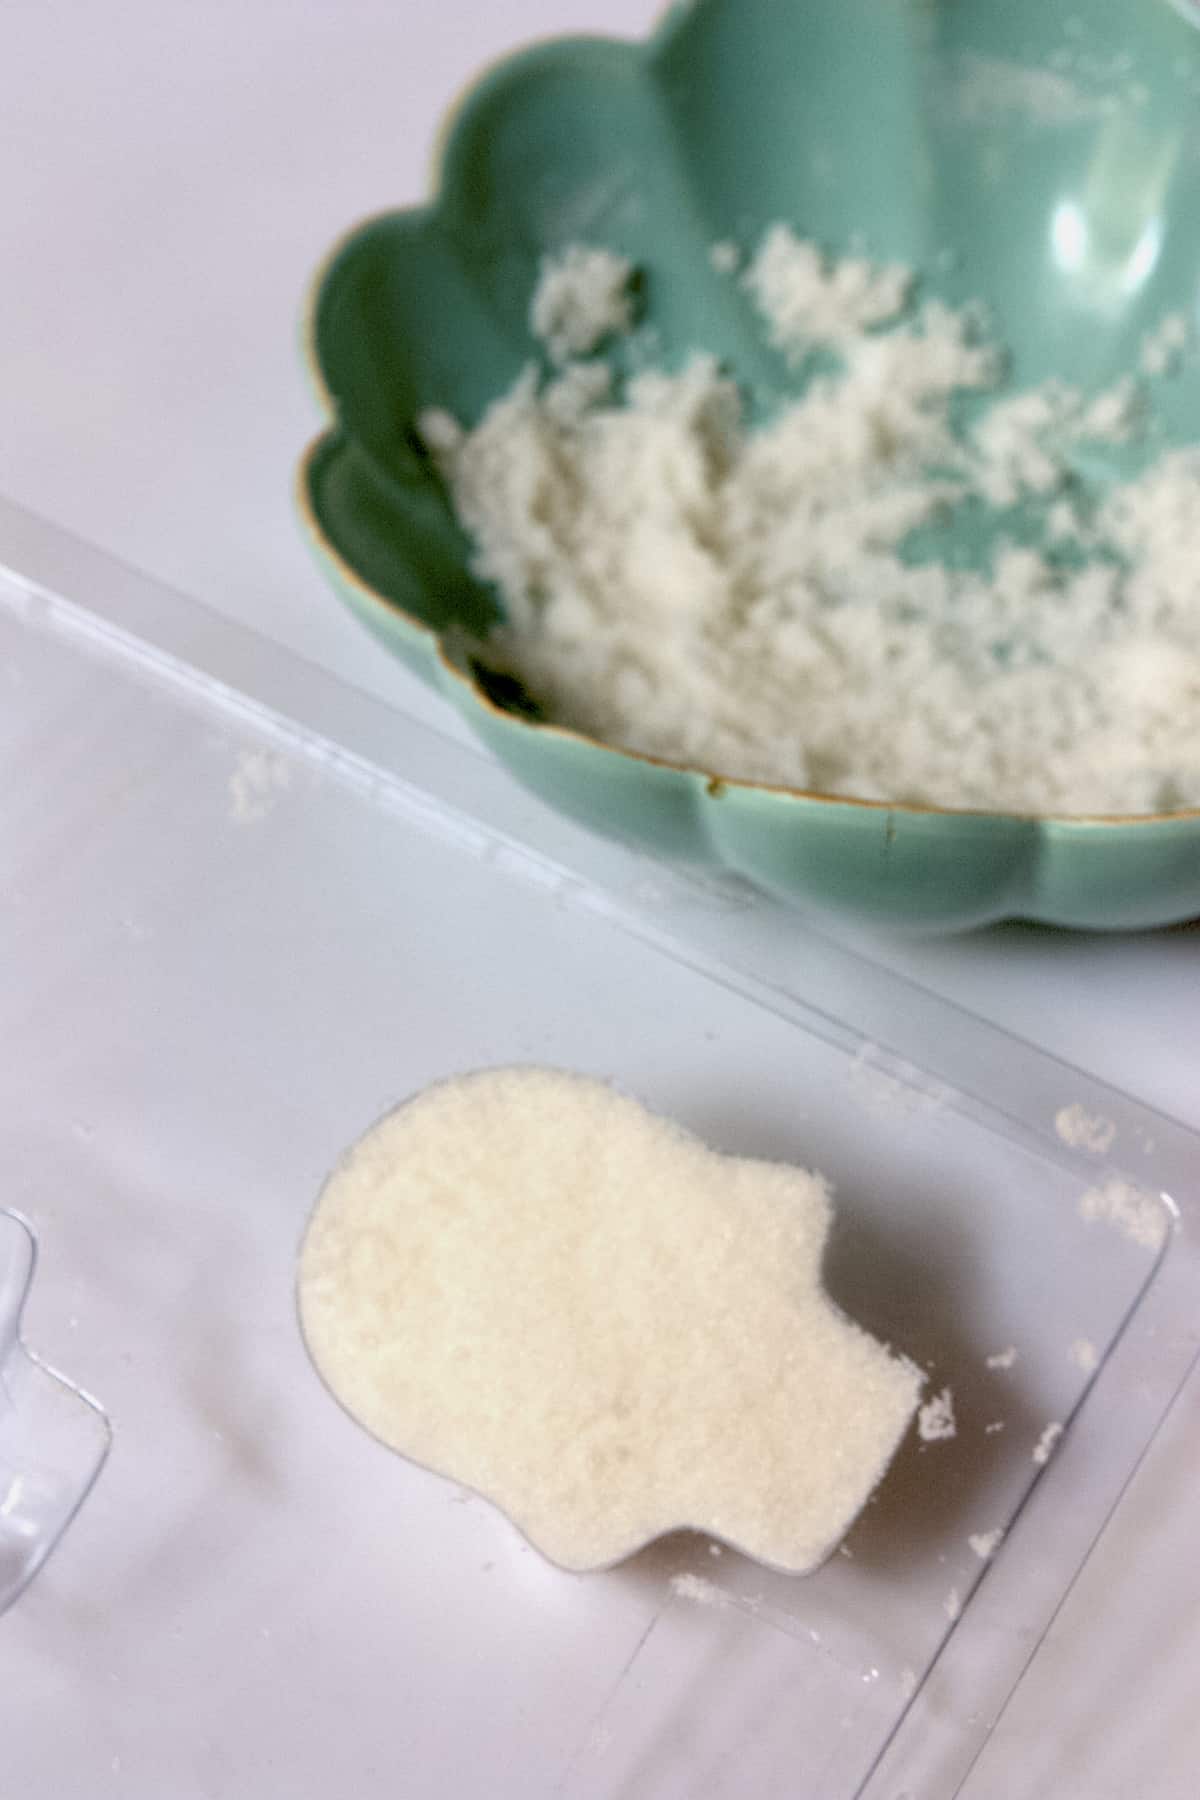 the sugar mixture for creating these Day of the Dead sugar skulls in a plastic skull mold